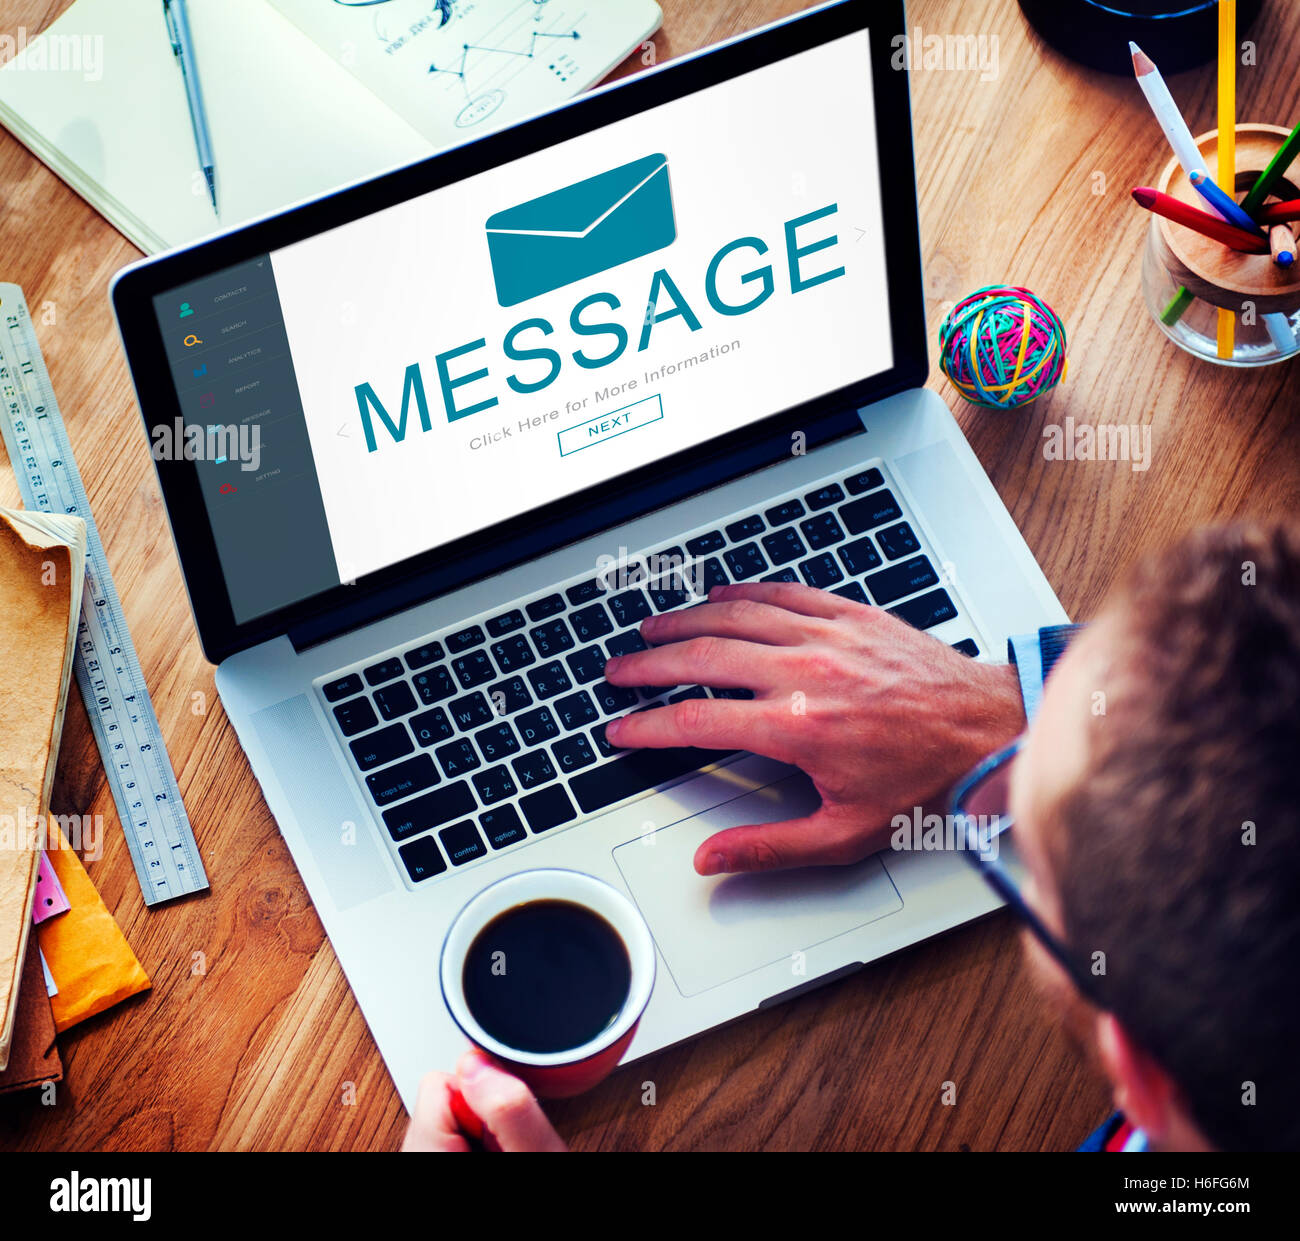 Message Contact Envelope Online Technology Concept Stock Photo